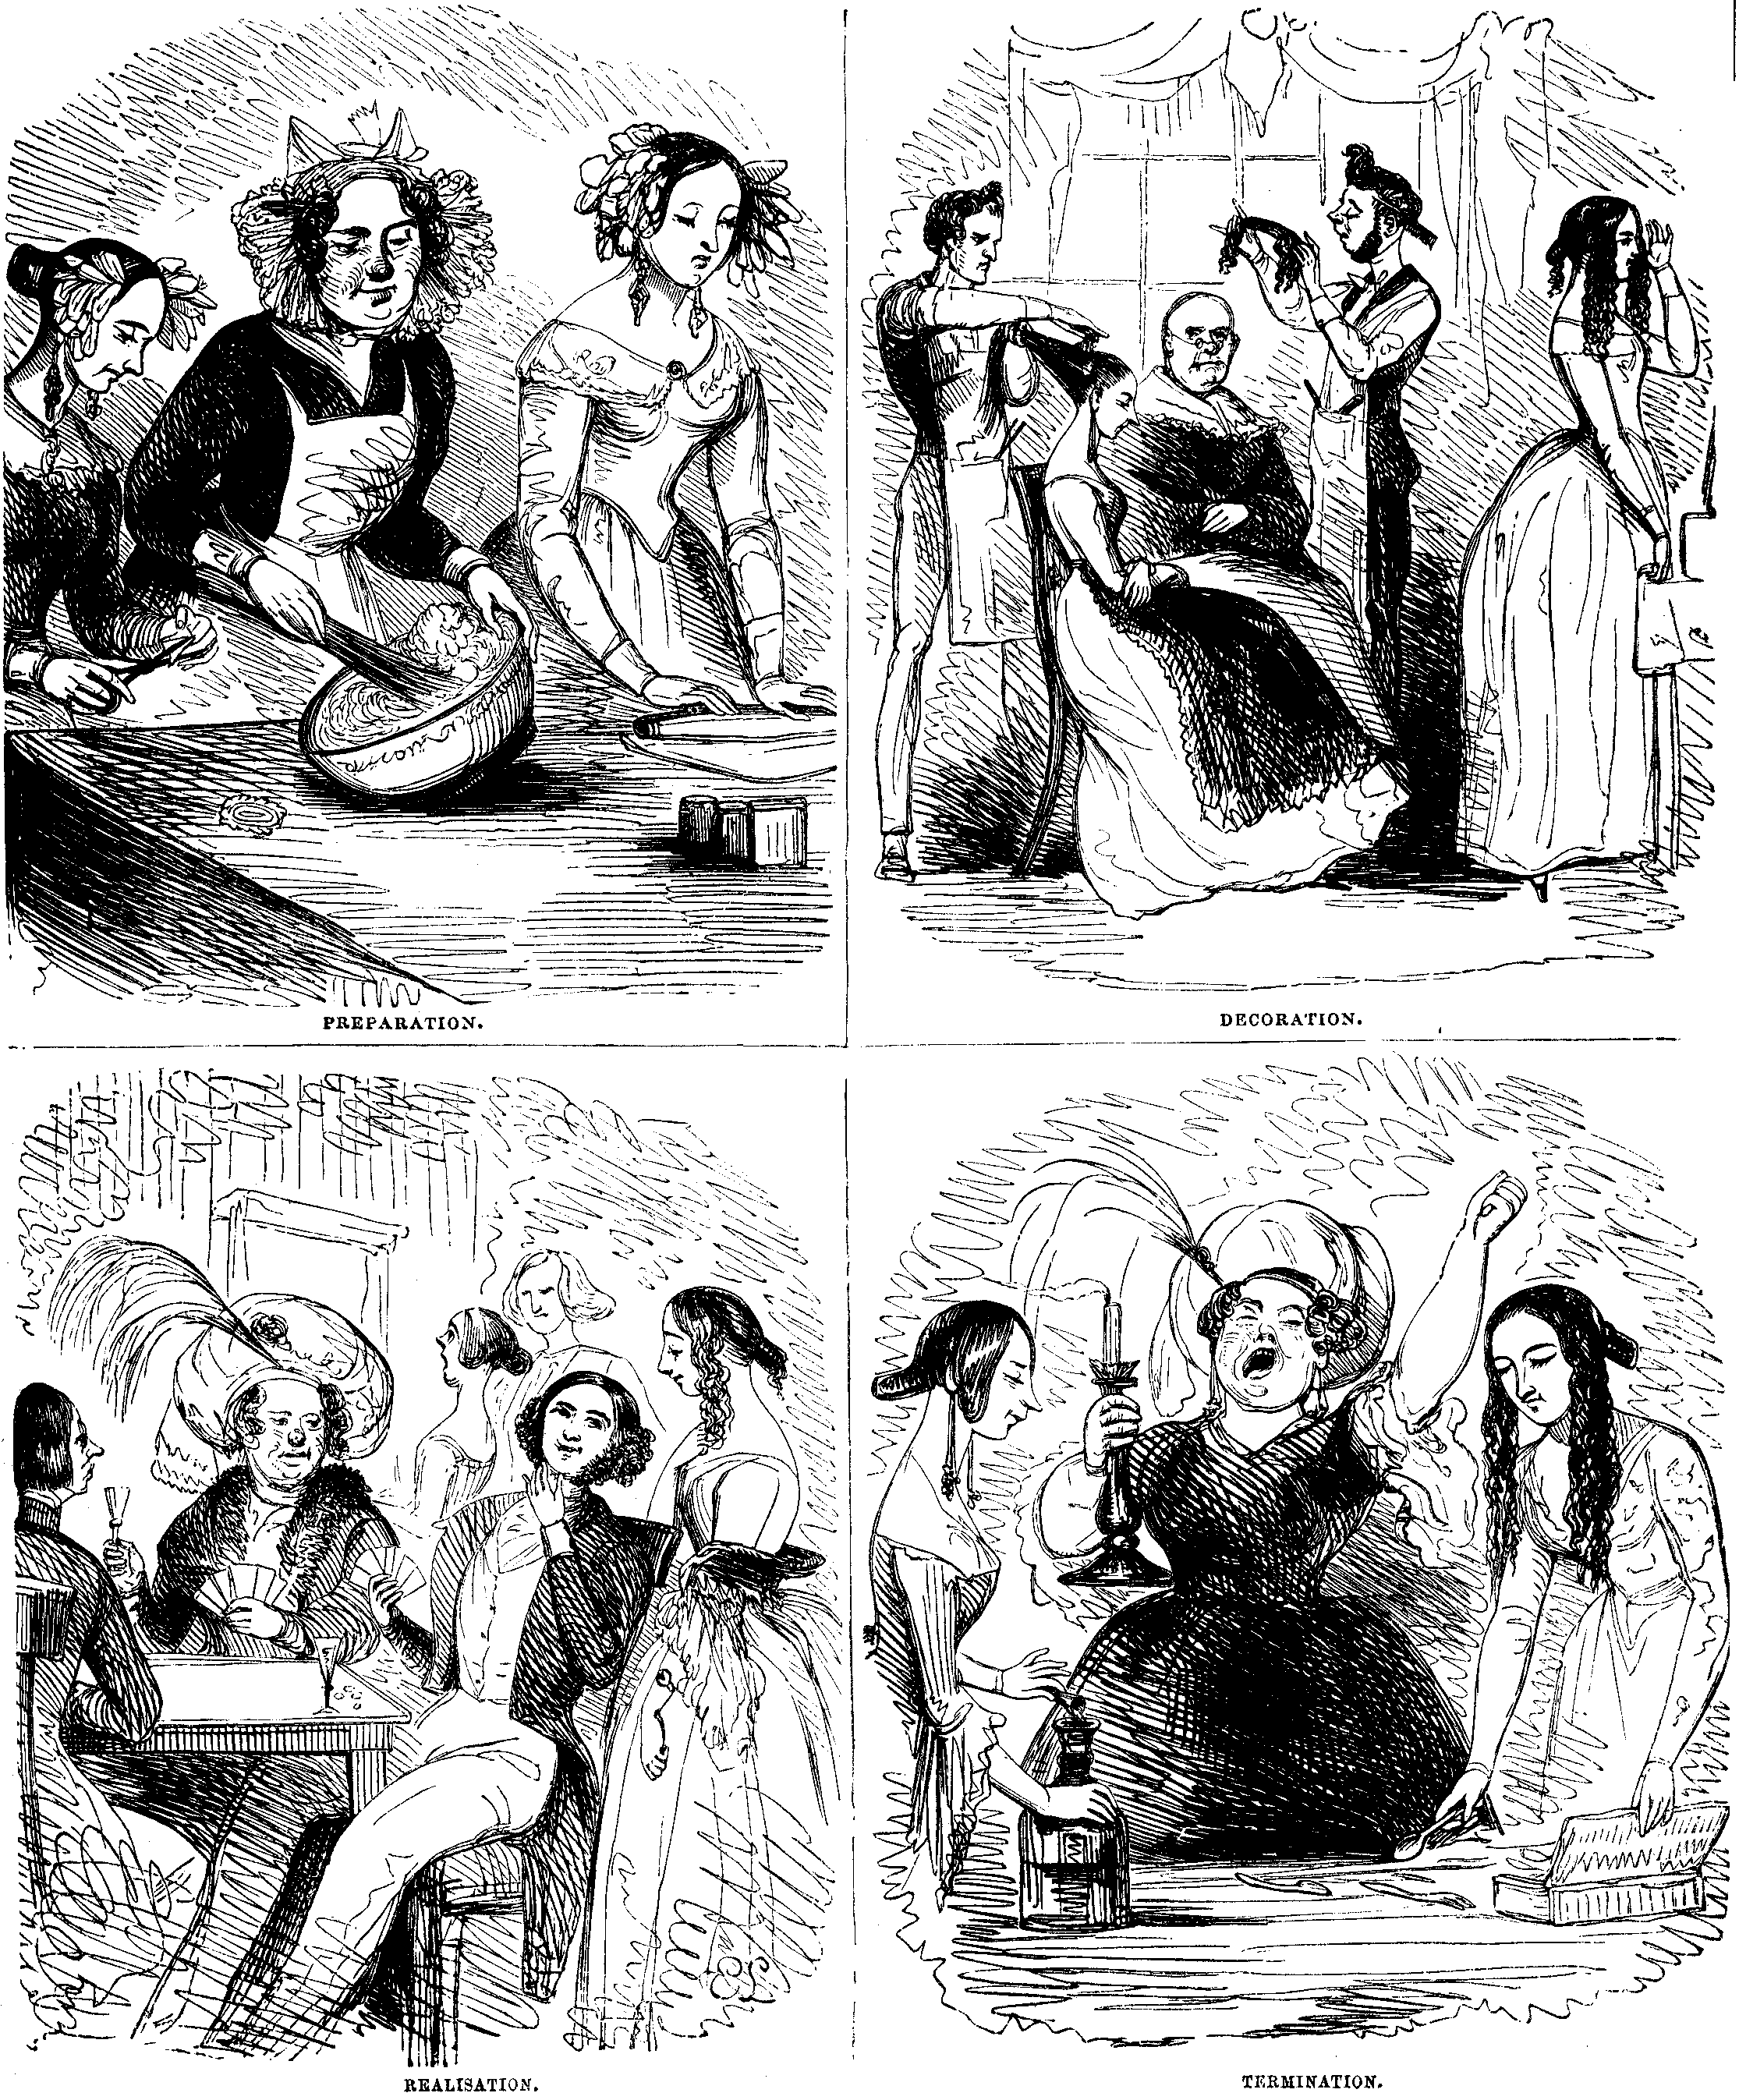 Scenes of a matron and a young woman preparing for a party.